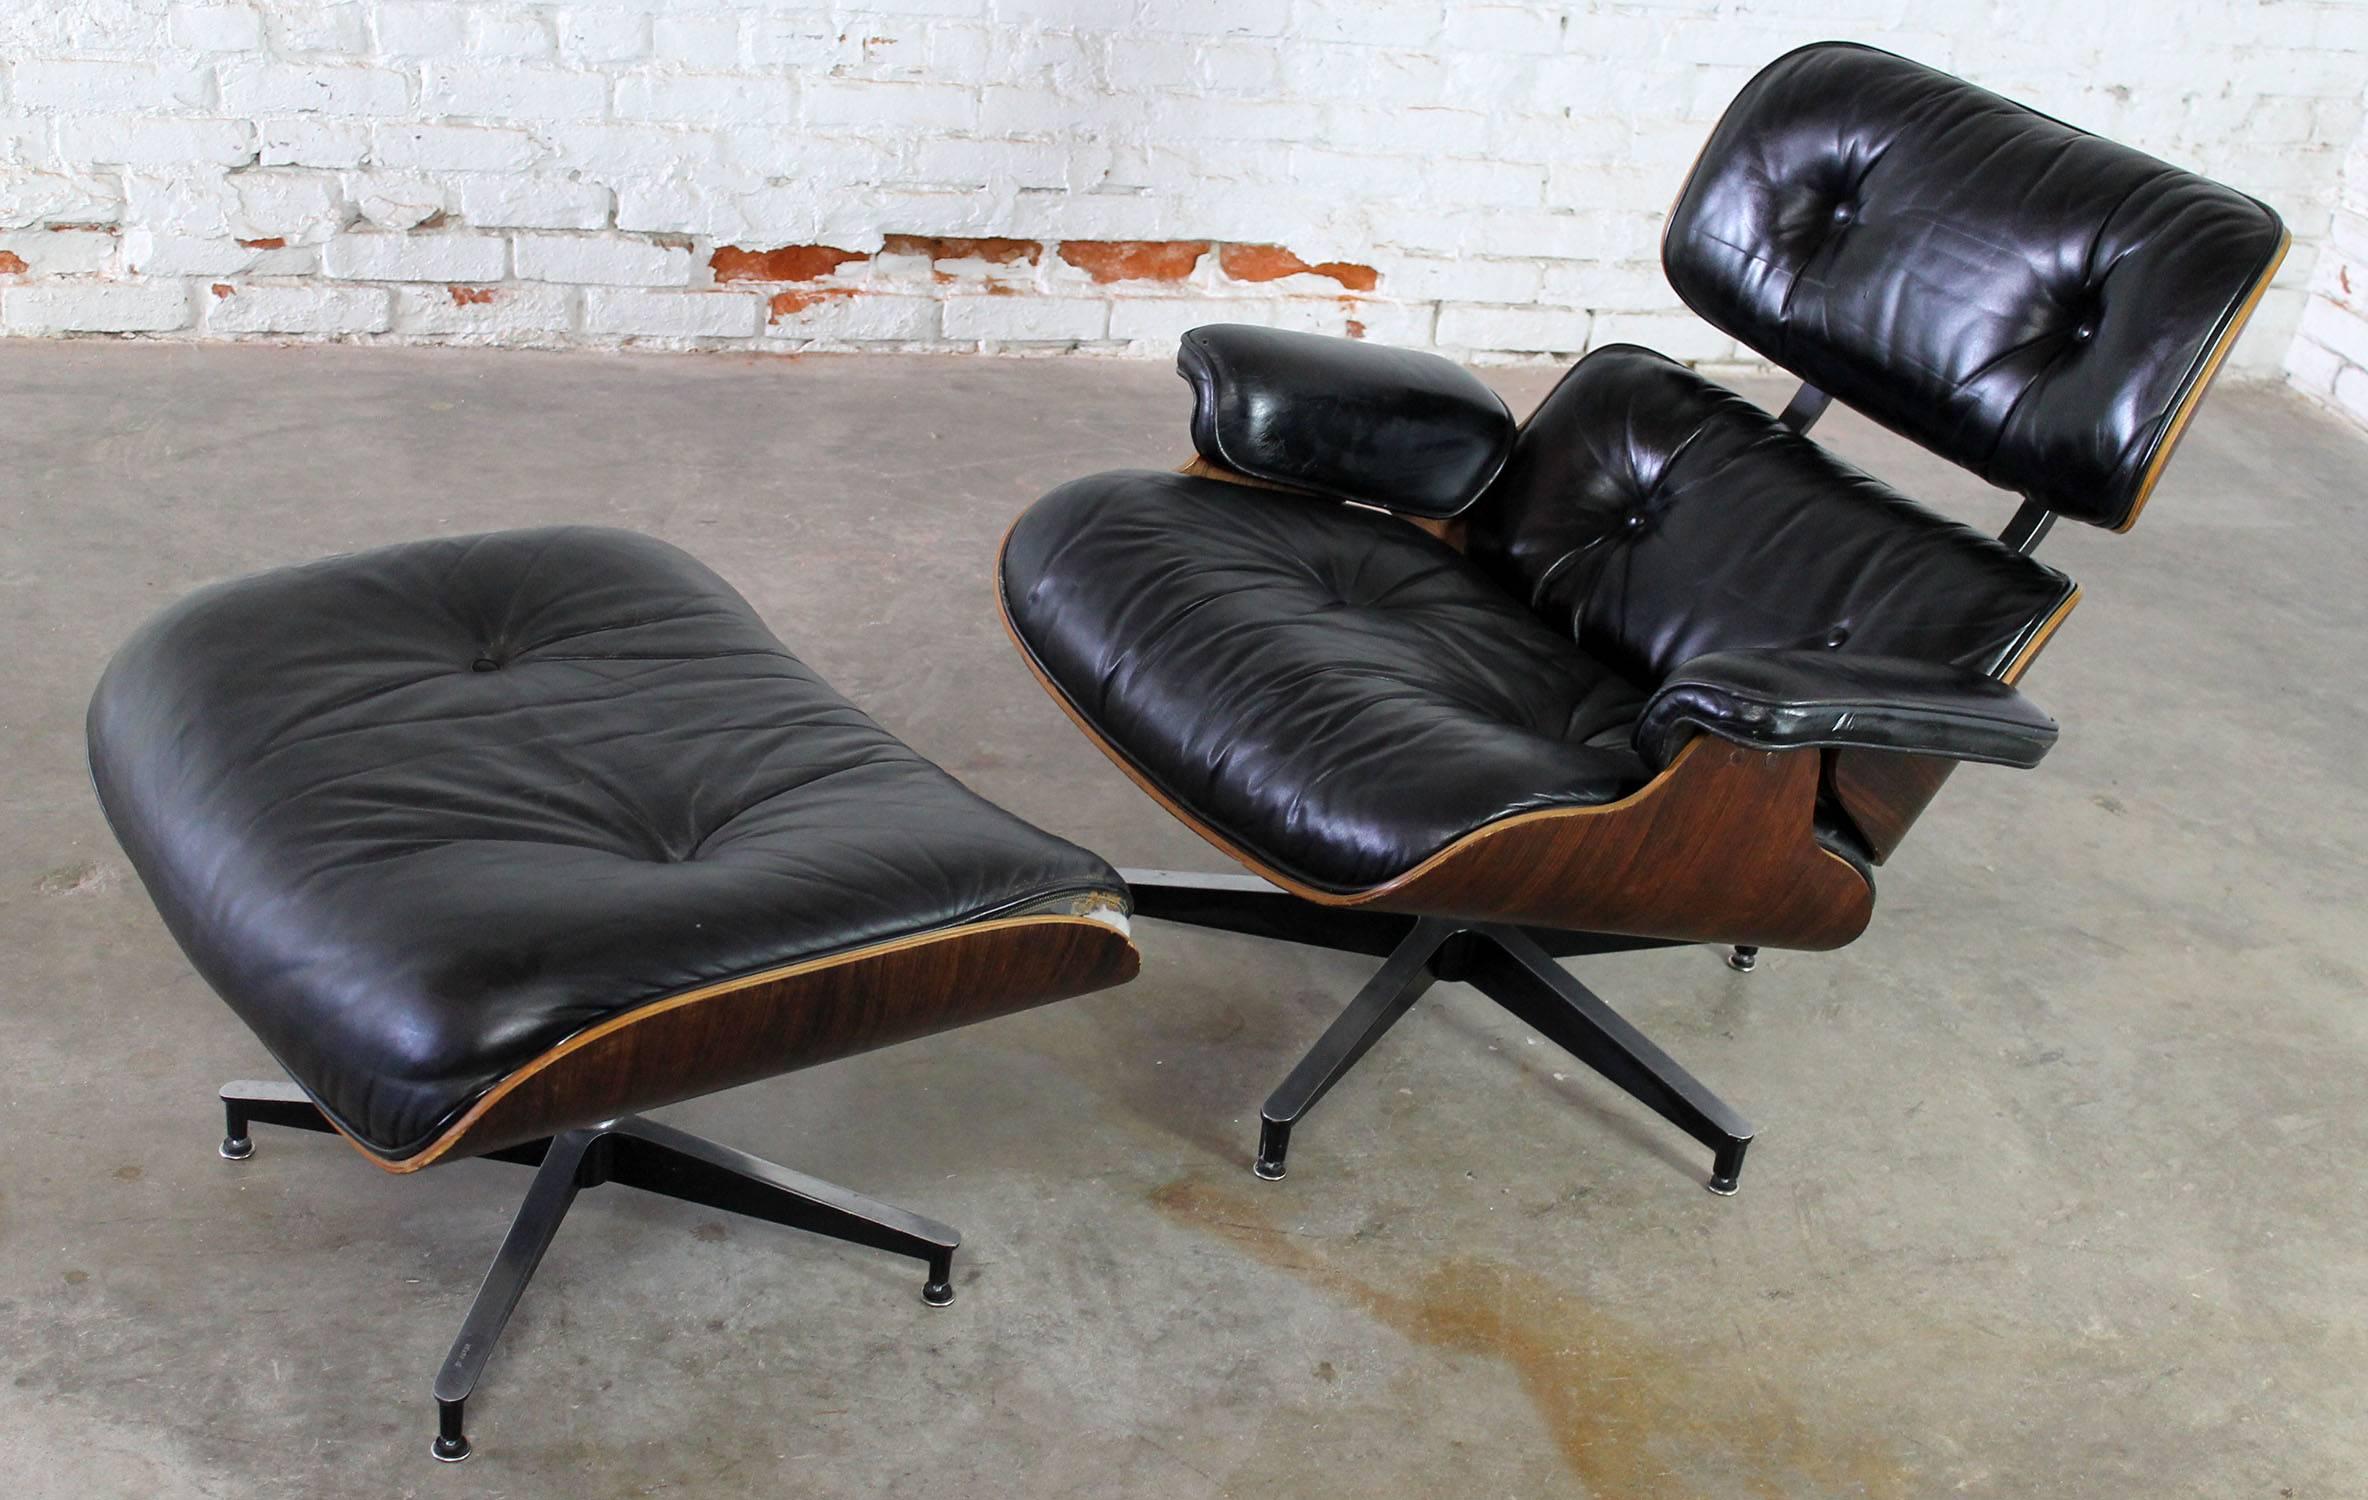 Iconic black leather and rosewood 670 and 671 Eames lounge chair and ottoman, circa 1971. This one has been used. Please read the long description for condition.

If you are looking for a pristine vintage Eames lounge chair and ottoman, this one